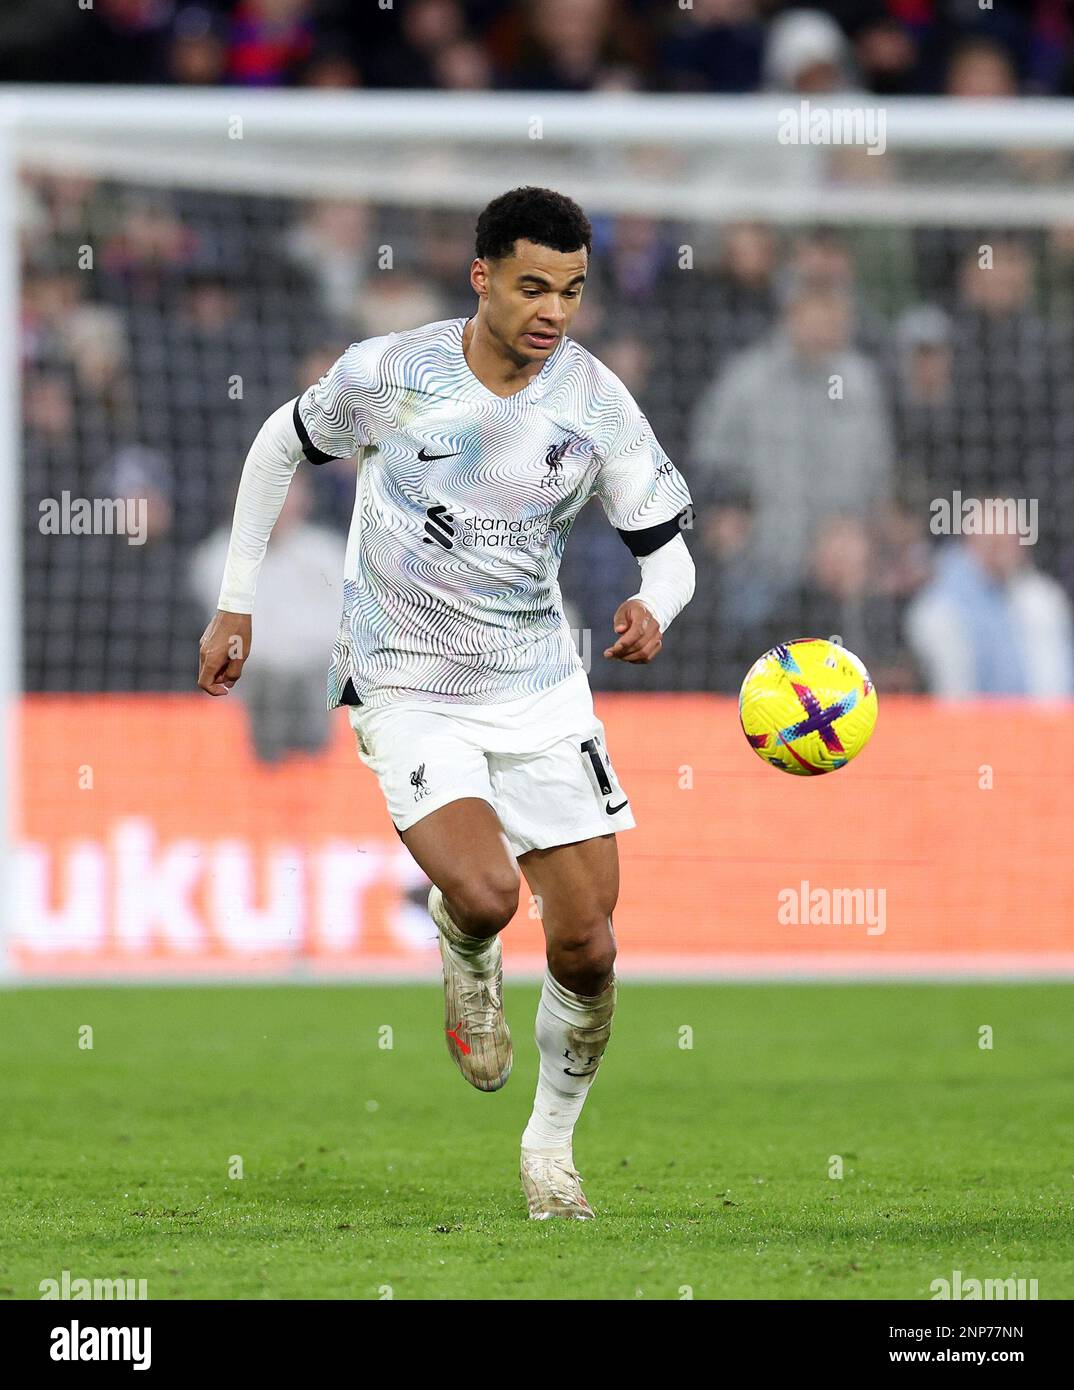 London, England, 25th February 2023. Cody Gakpo of Liverpool during the Premier League match at Selhurst Park, London. Picture credit should read: David Klein / Sportimage Stock Photo